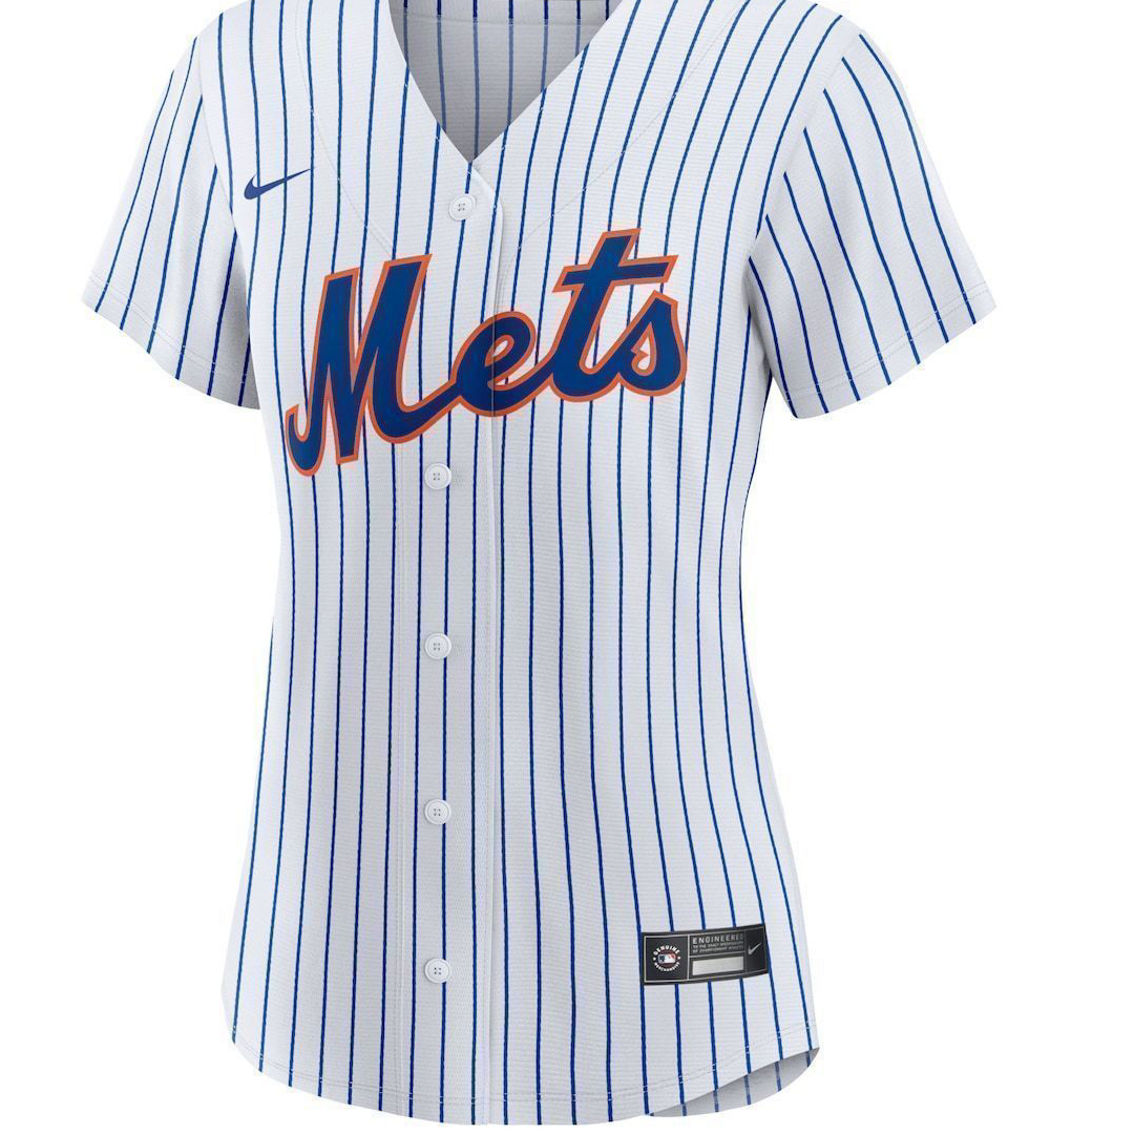 Nike Women's Francisco Lindor White New York Mets Home Replica Player Jersey - Image 3 of 4